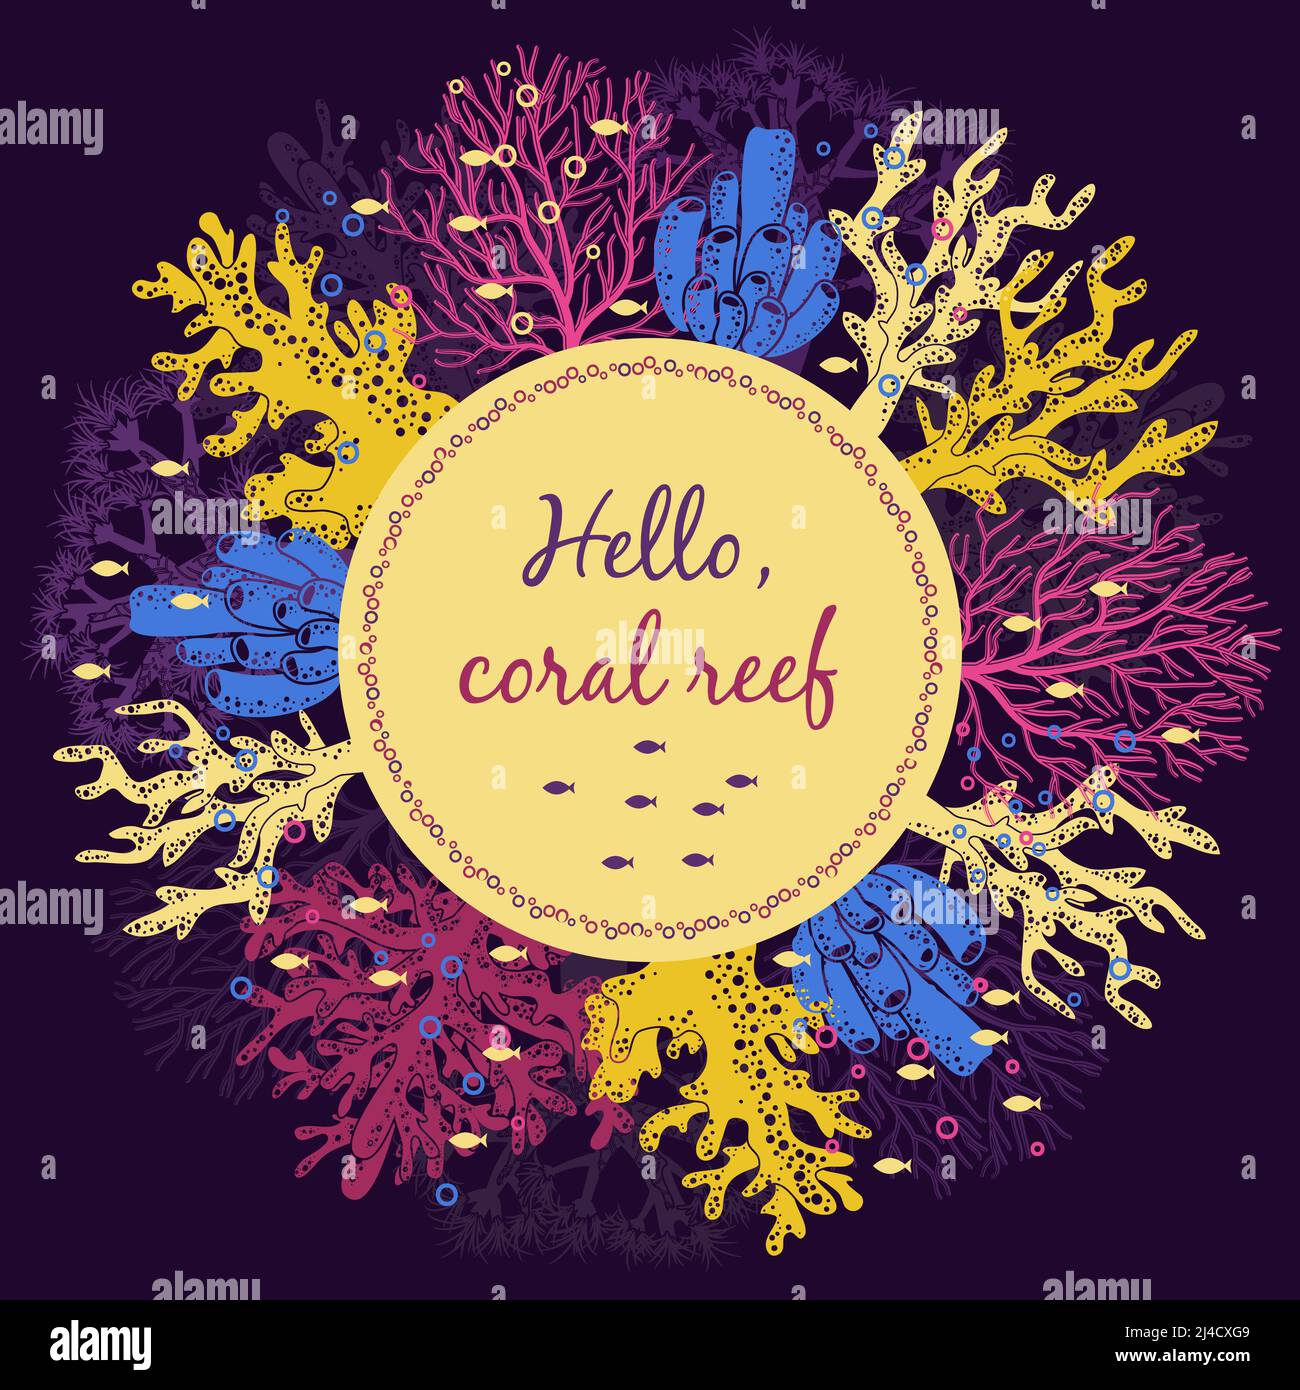 Coral reef invitation card template. Ocean and water, underwater and marine, vector illustration Stock Vector